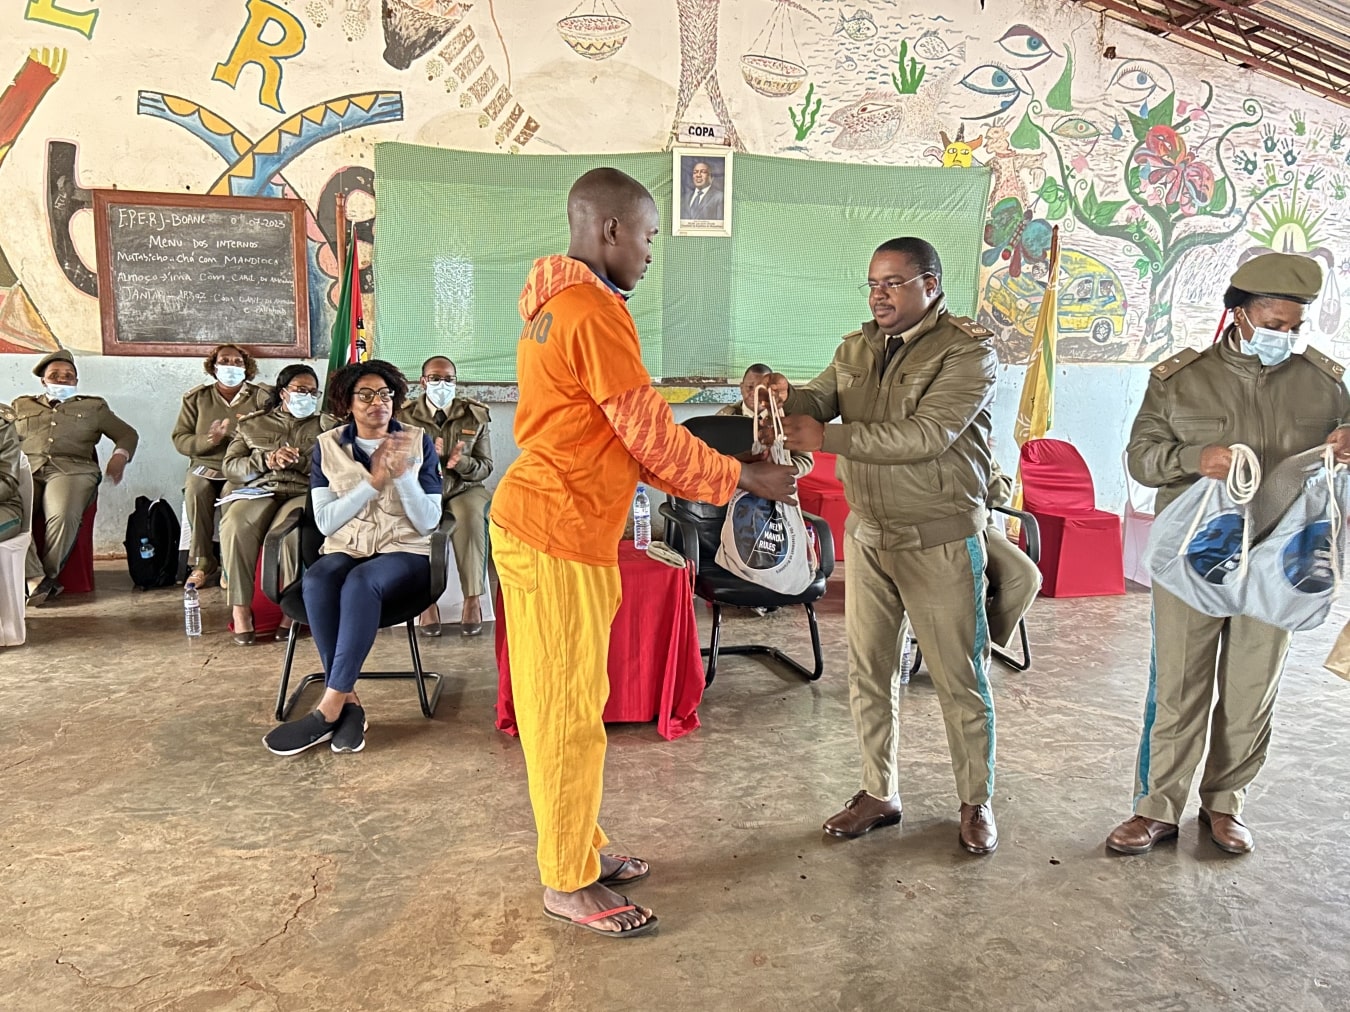 <p><span style="color: #808080;">Caption: Youth inmate receives Nelson Mandela kit. </span><span style="color: #808080;">© UNODC</span></p>